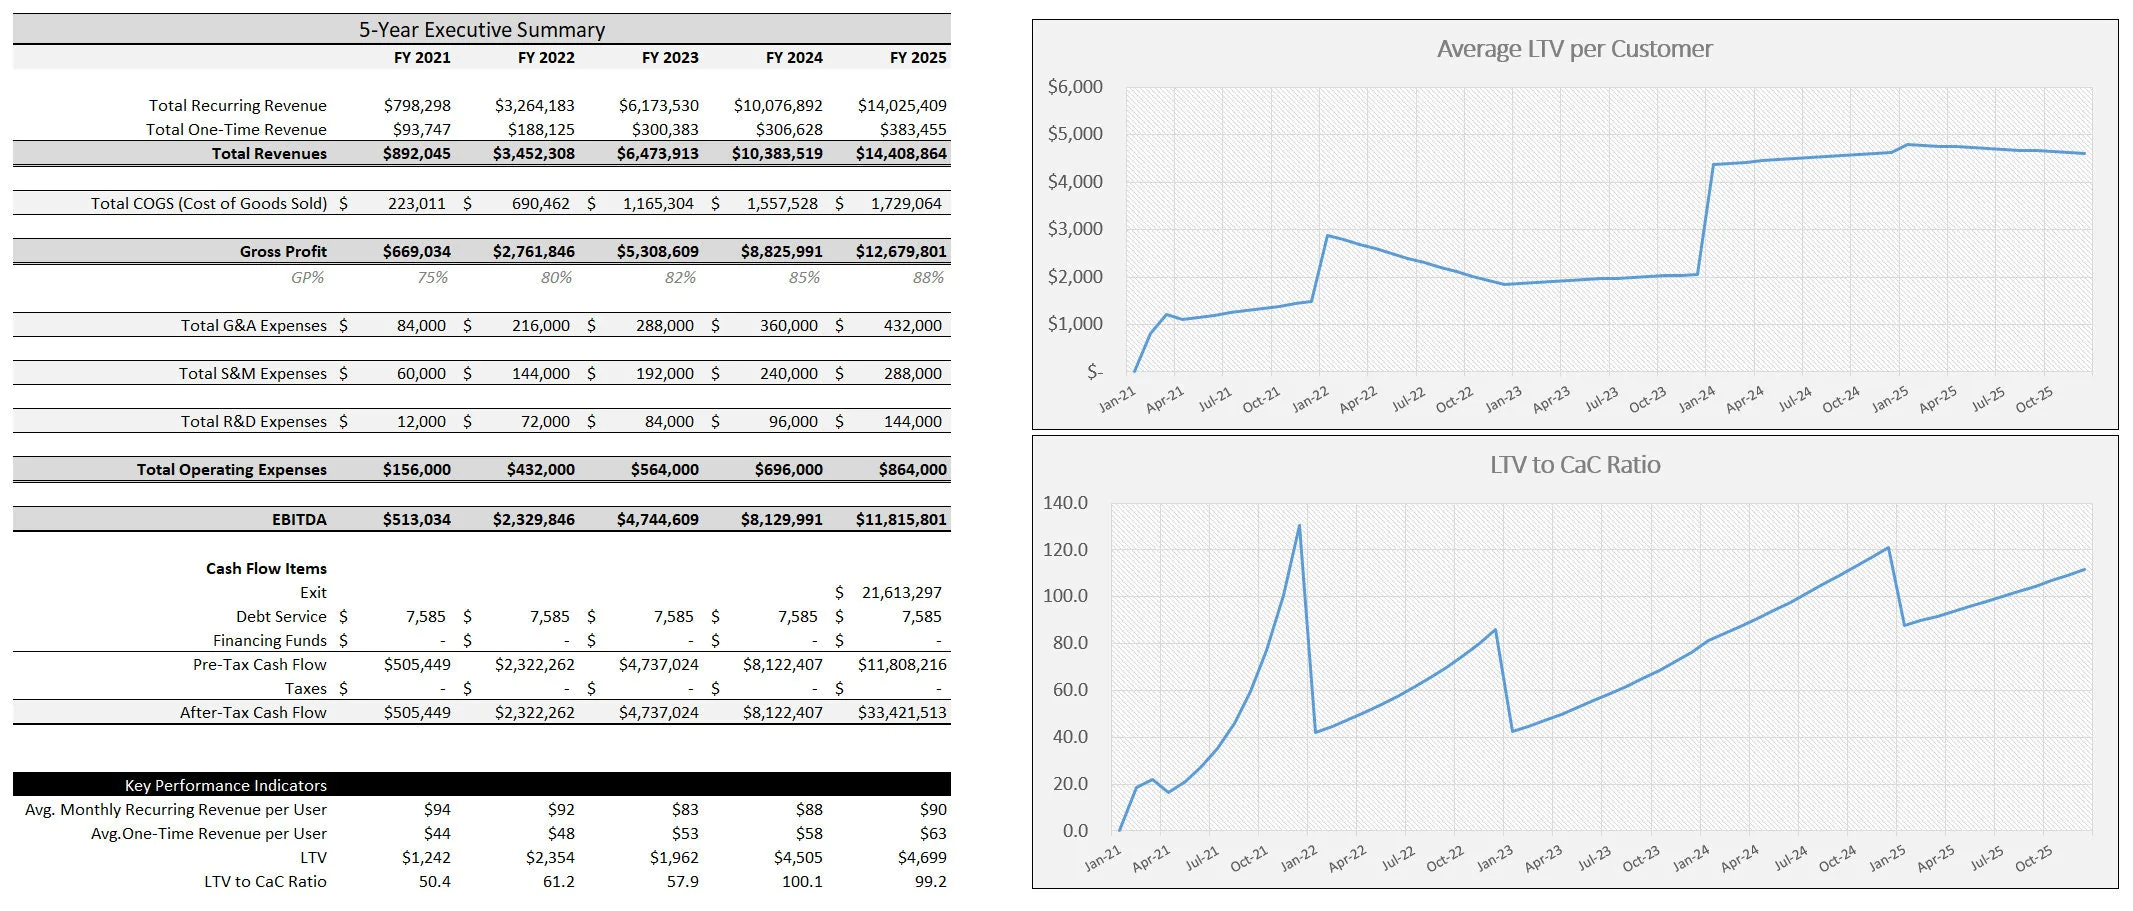 Basic SaaS Startup Model: 4 Pricing Tiers (Excel template (XLSX)) Preview Image